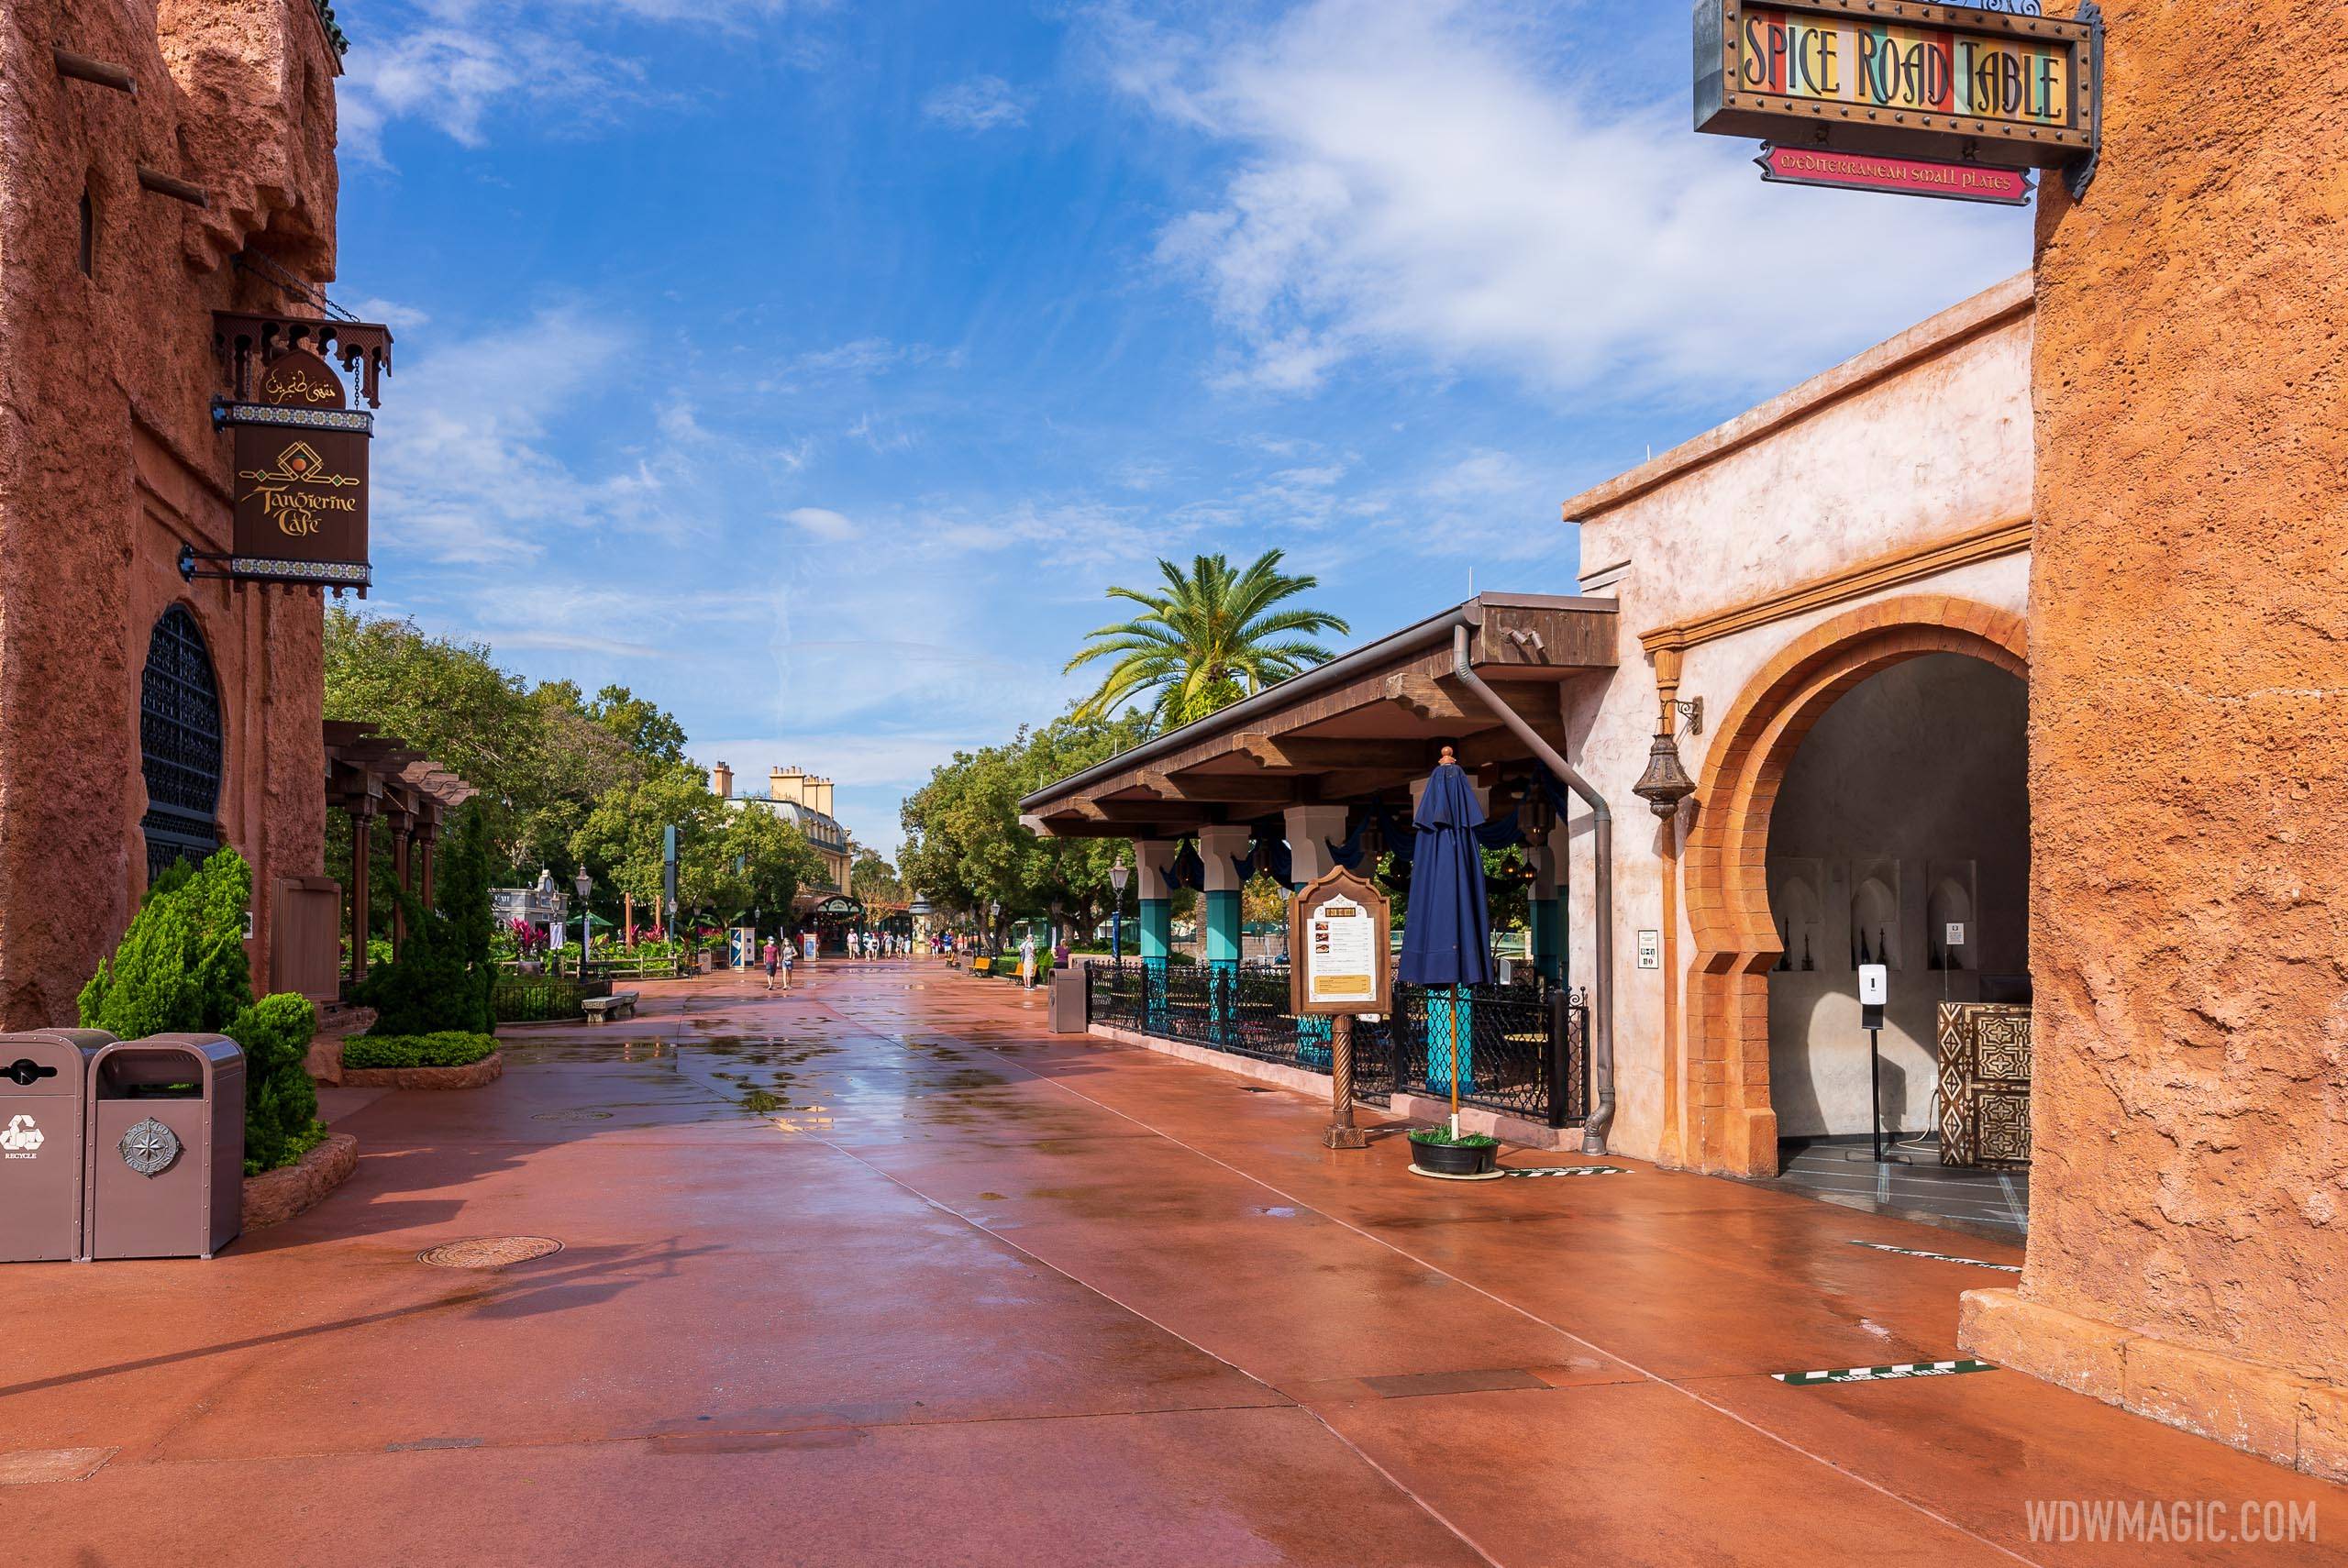 New waterside 'Spice Road Table' dining coming to Epcot's Morocco Pavilion